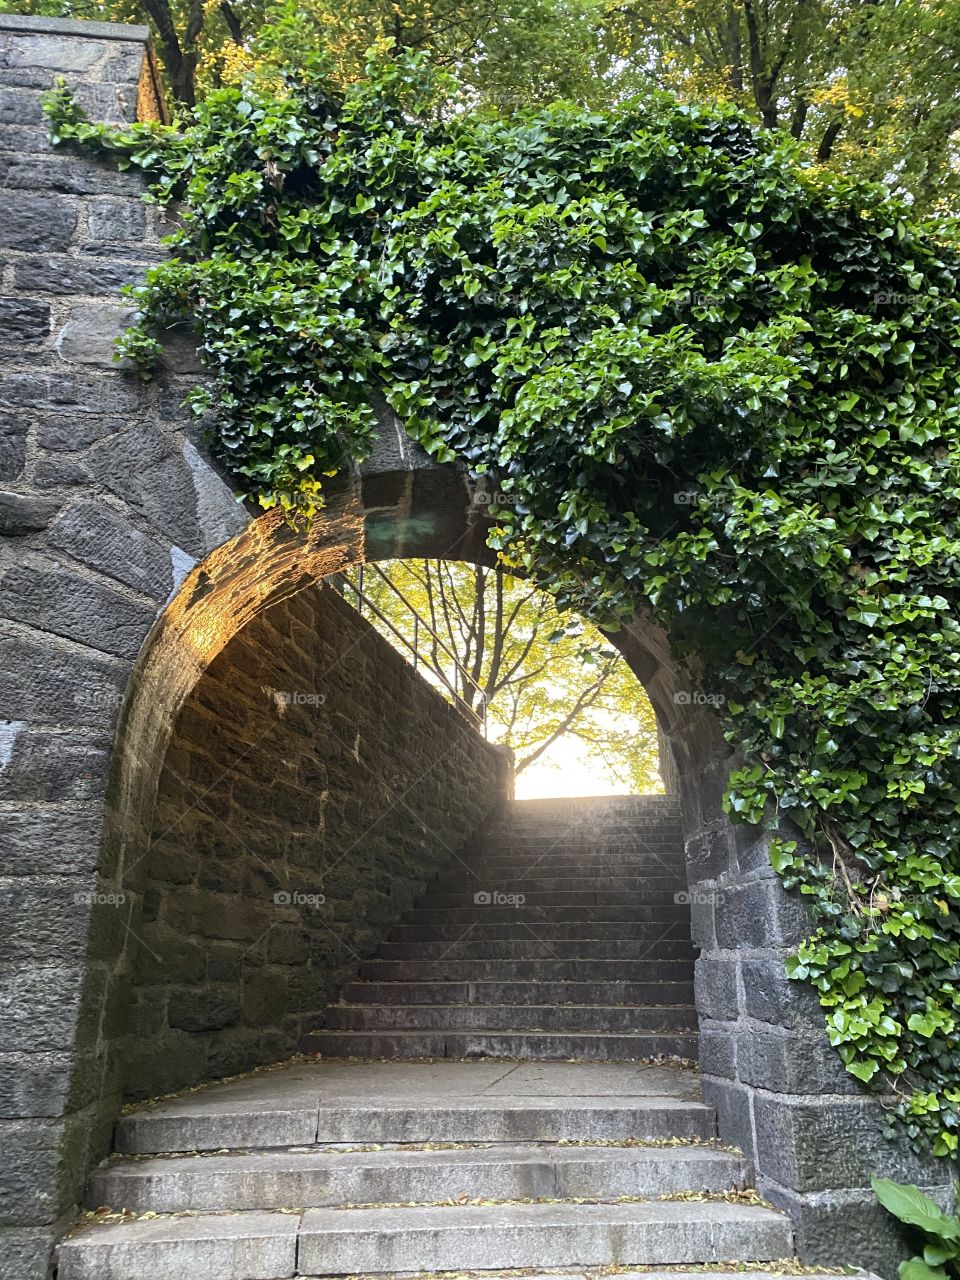 Sunlight through a stone archway with ivy